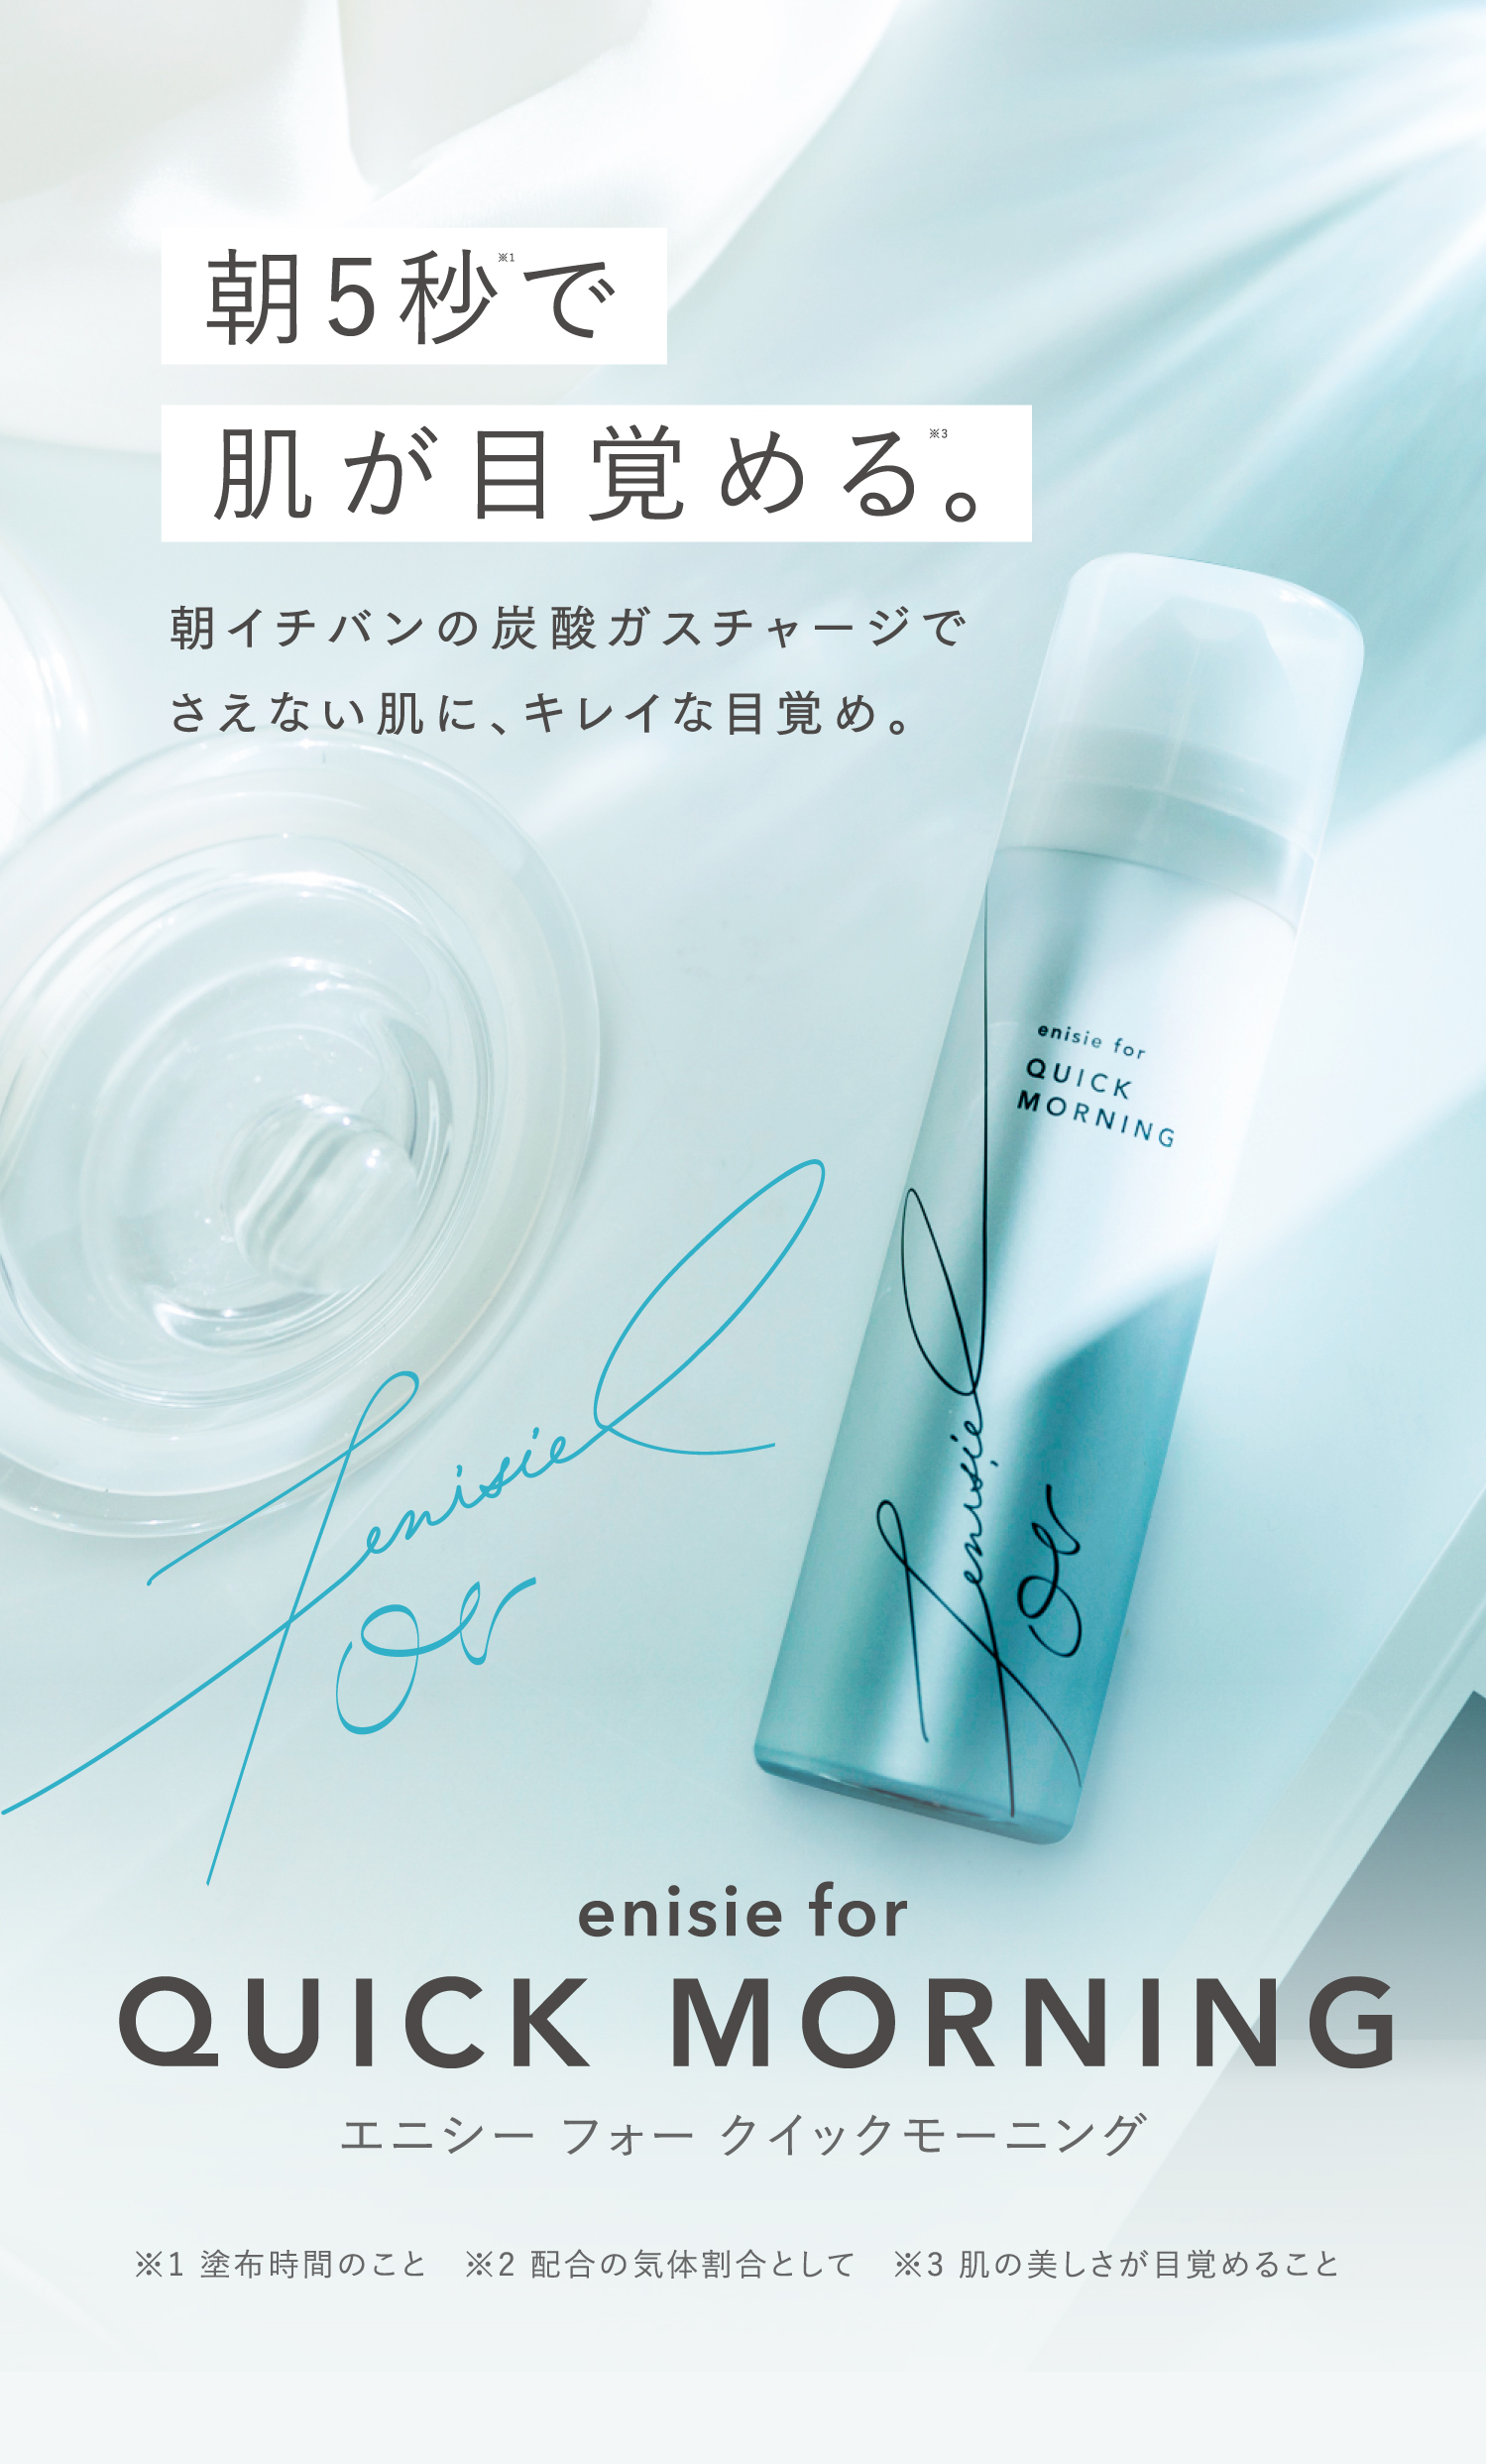 enisie for QUICK MORNING | エニシー フォー クイックモーニング